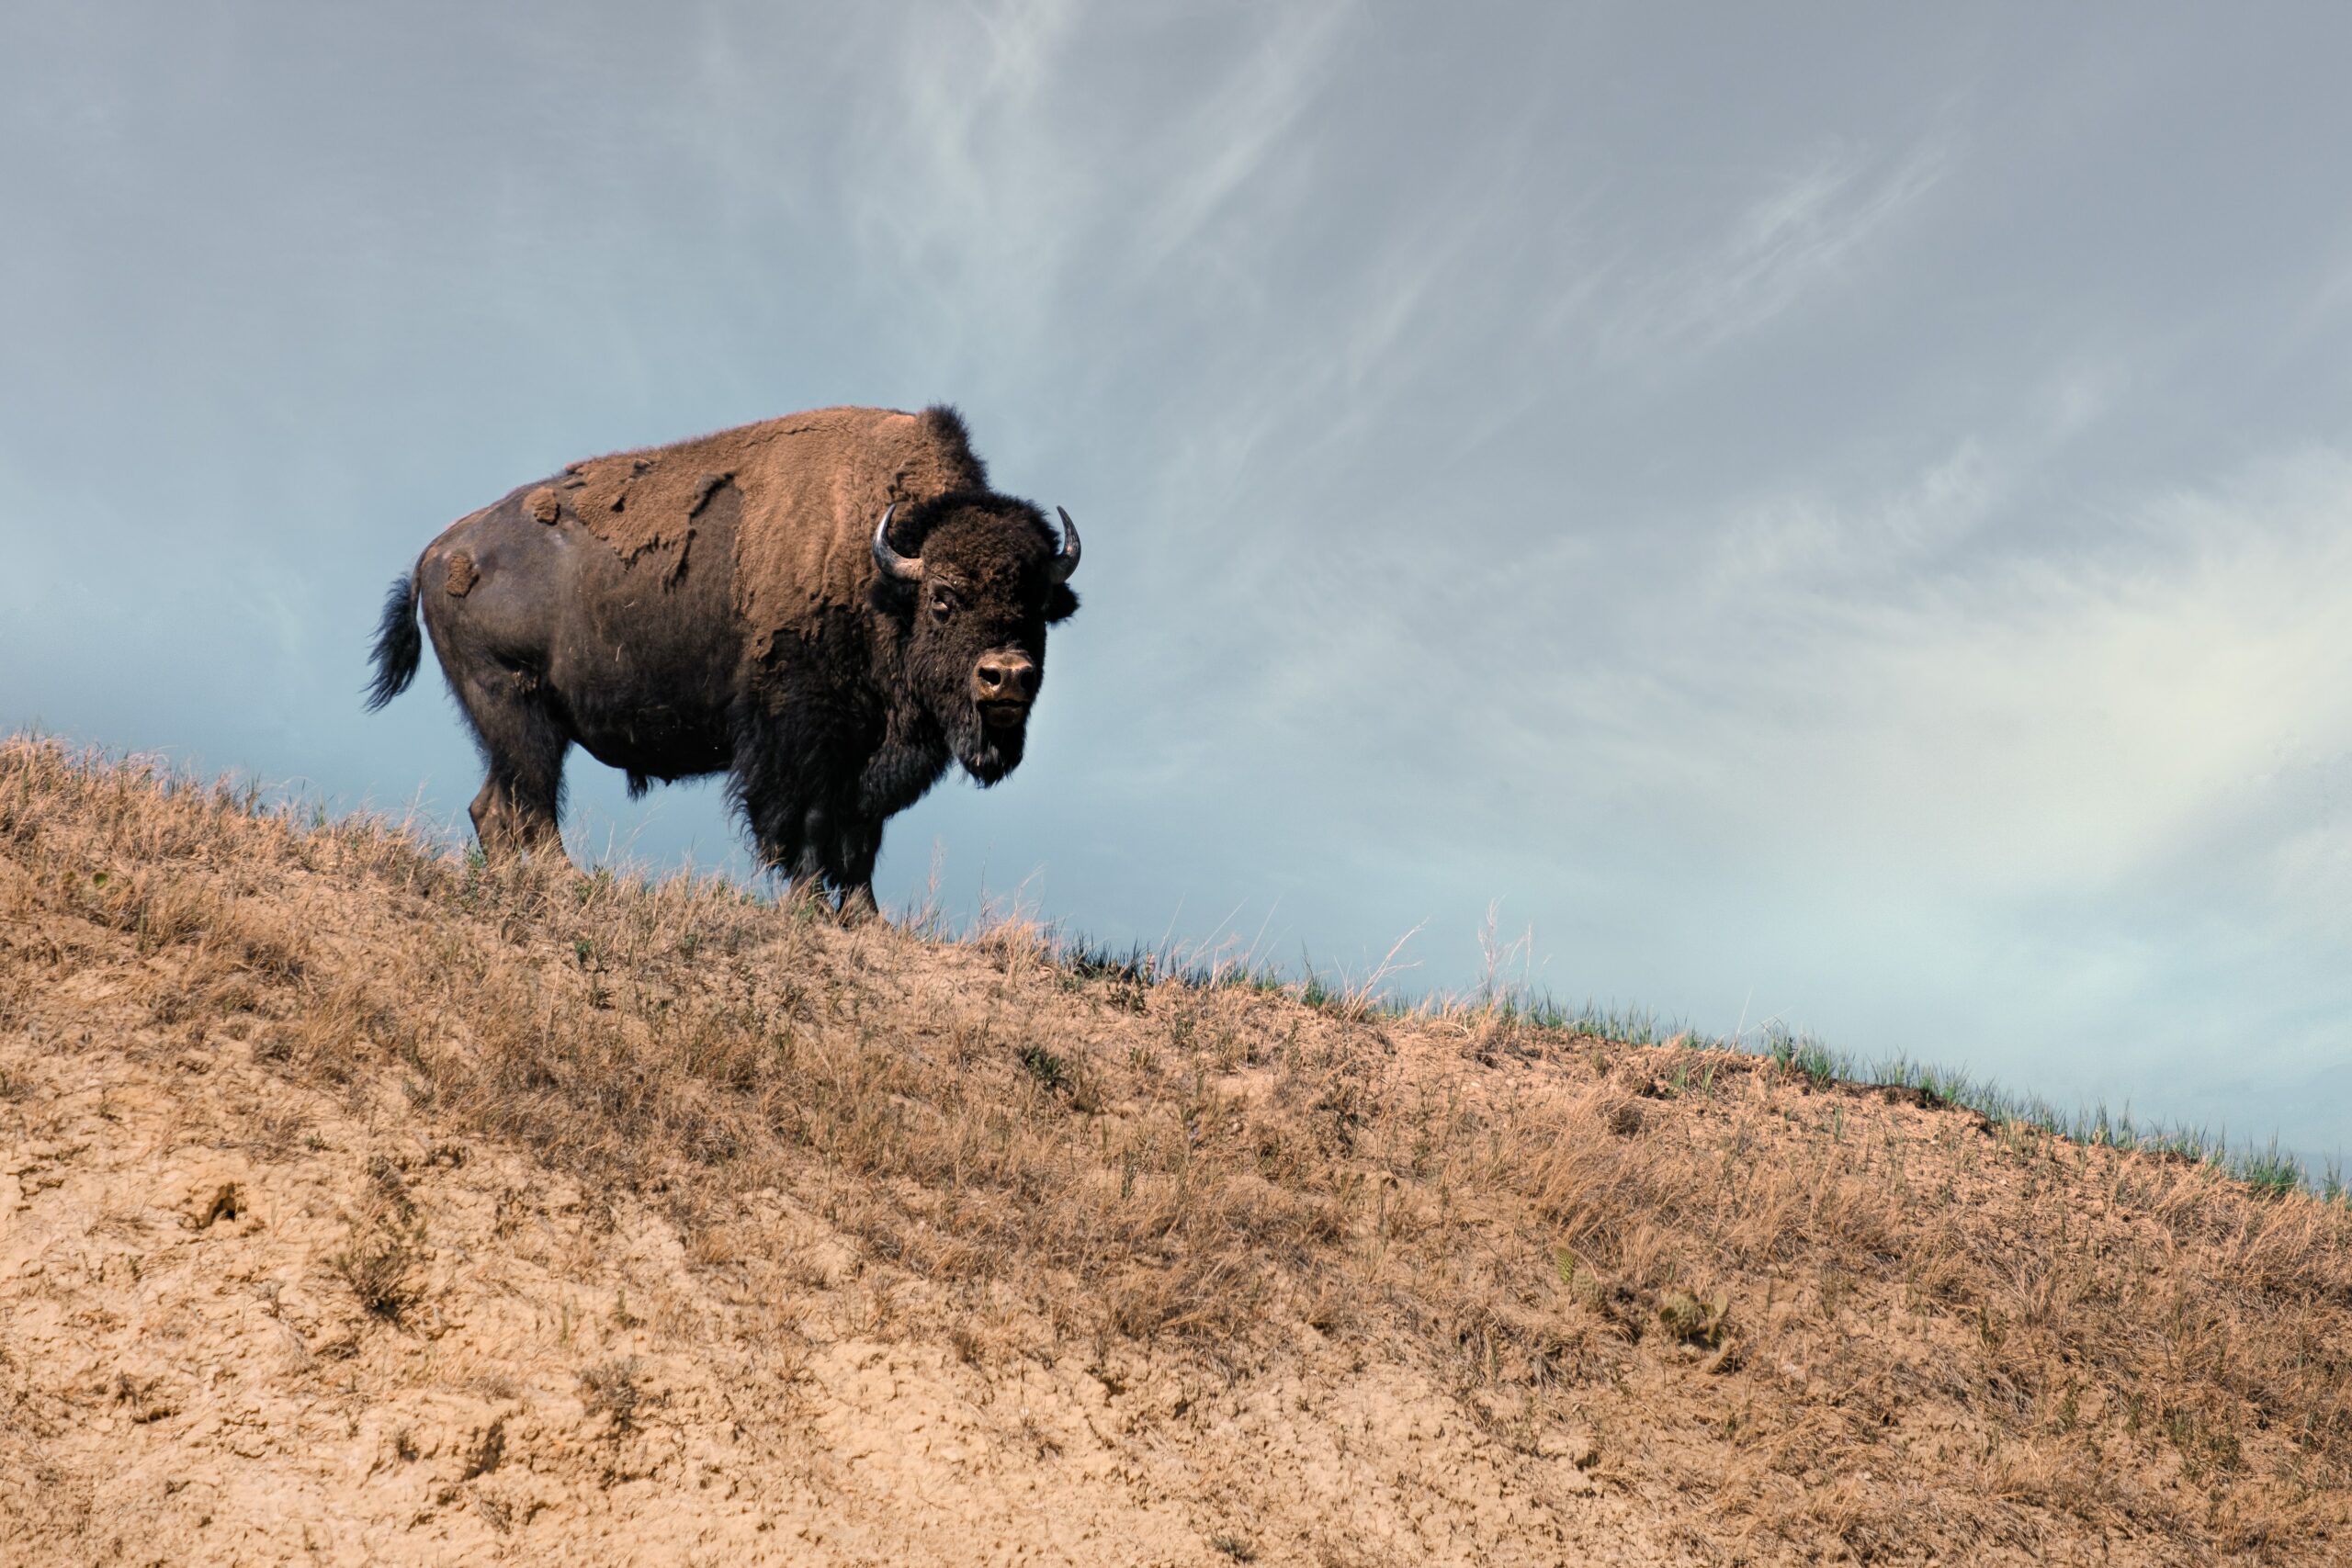 Image of bison on top of a hill, facing the camera.